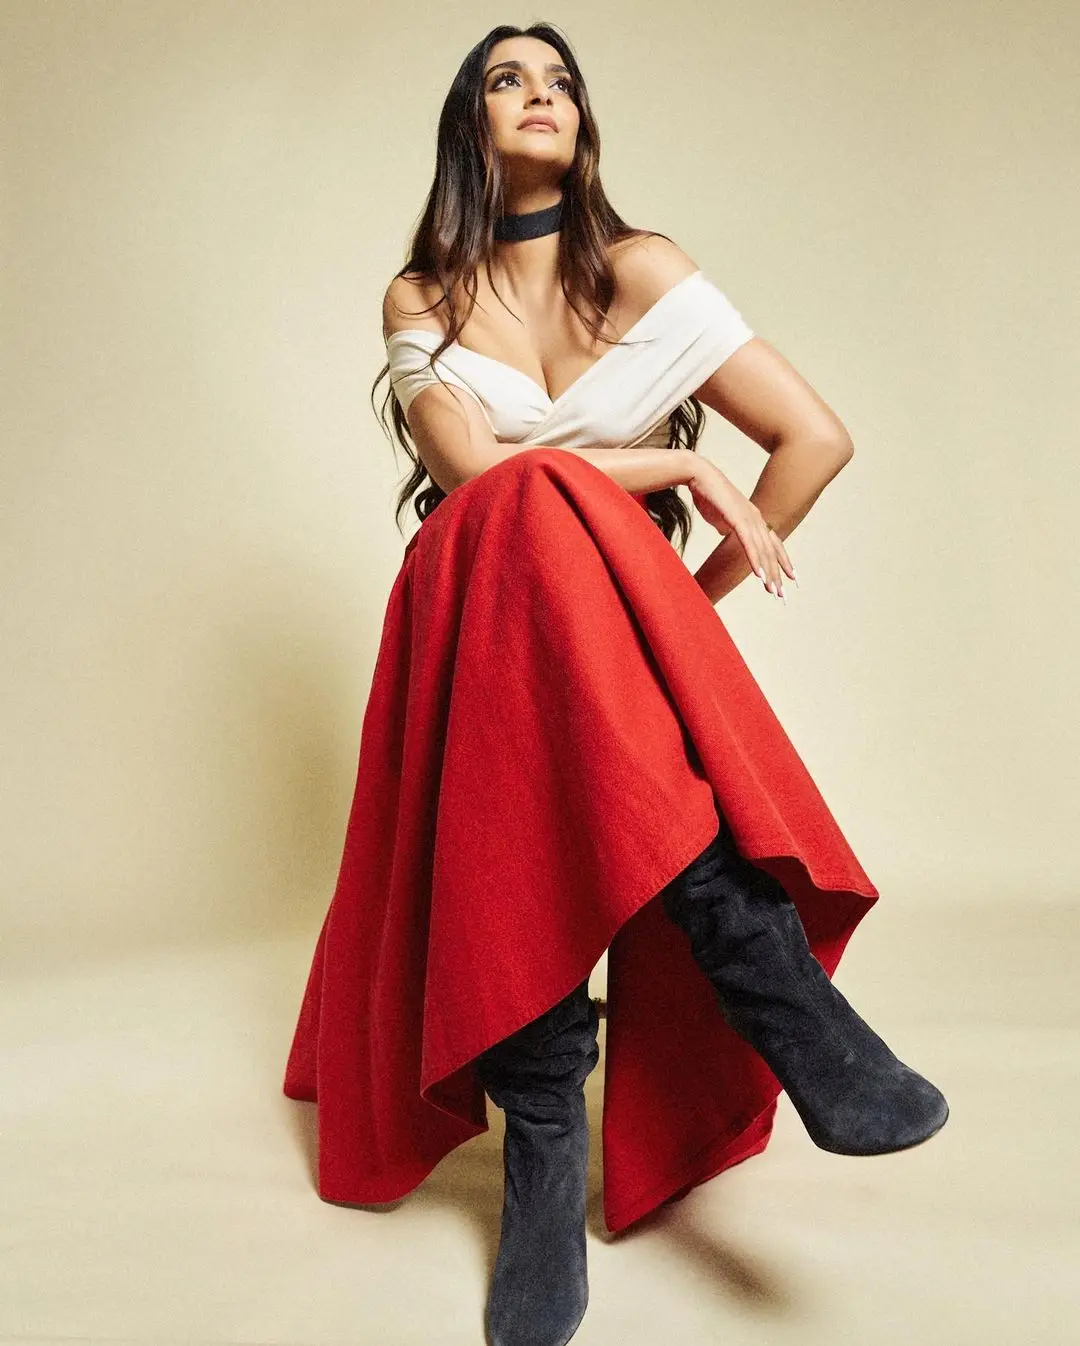 BOLLYWOOD ACTRESS SONAM KAPOOR PHOTOSHOOT IN RED GOWN 5